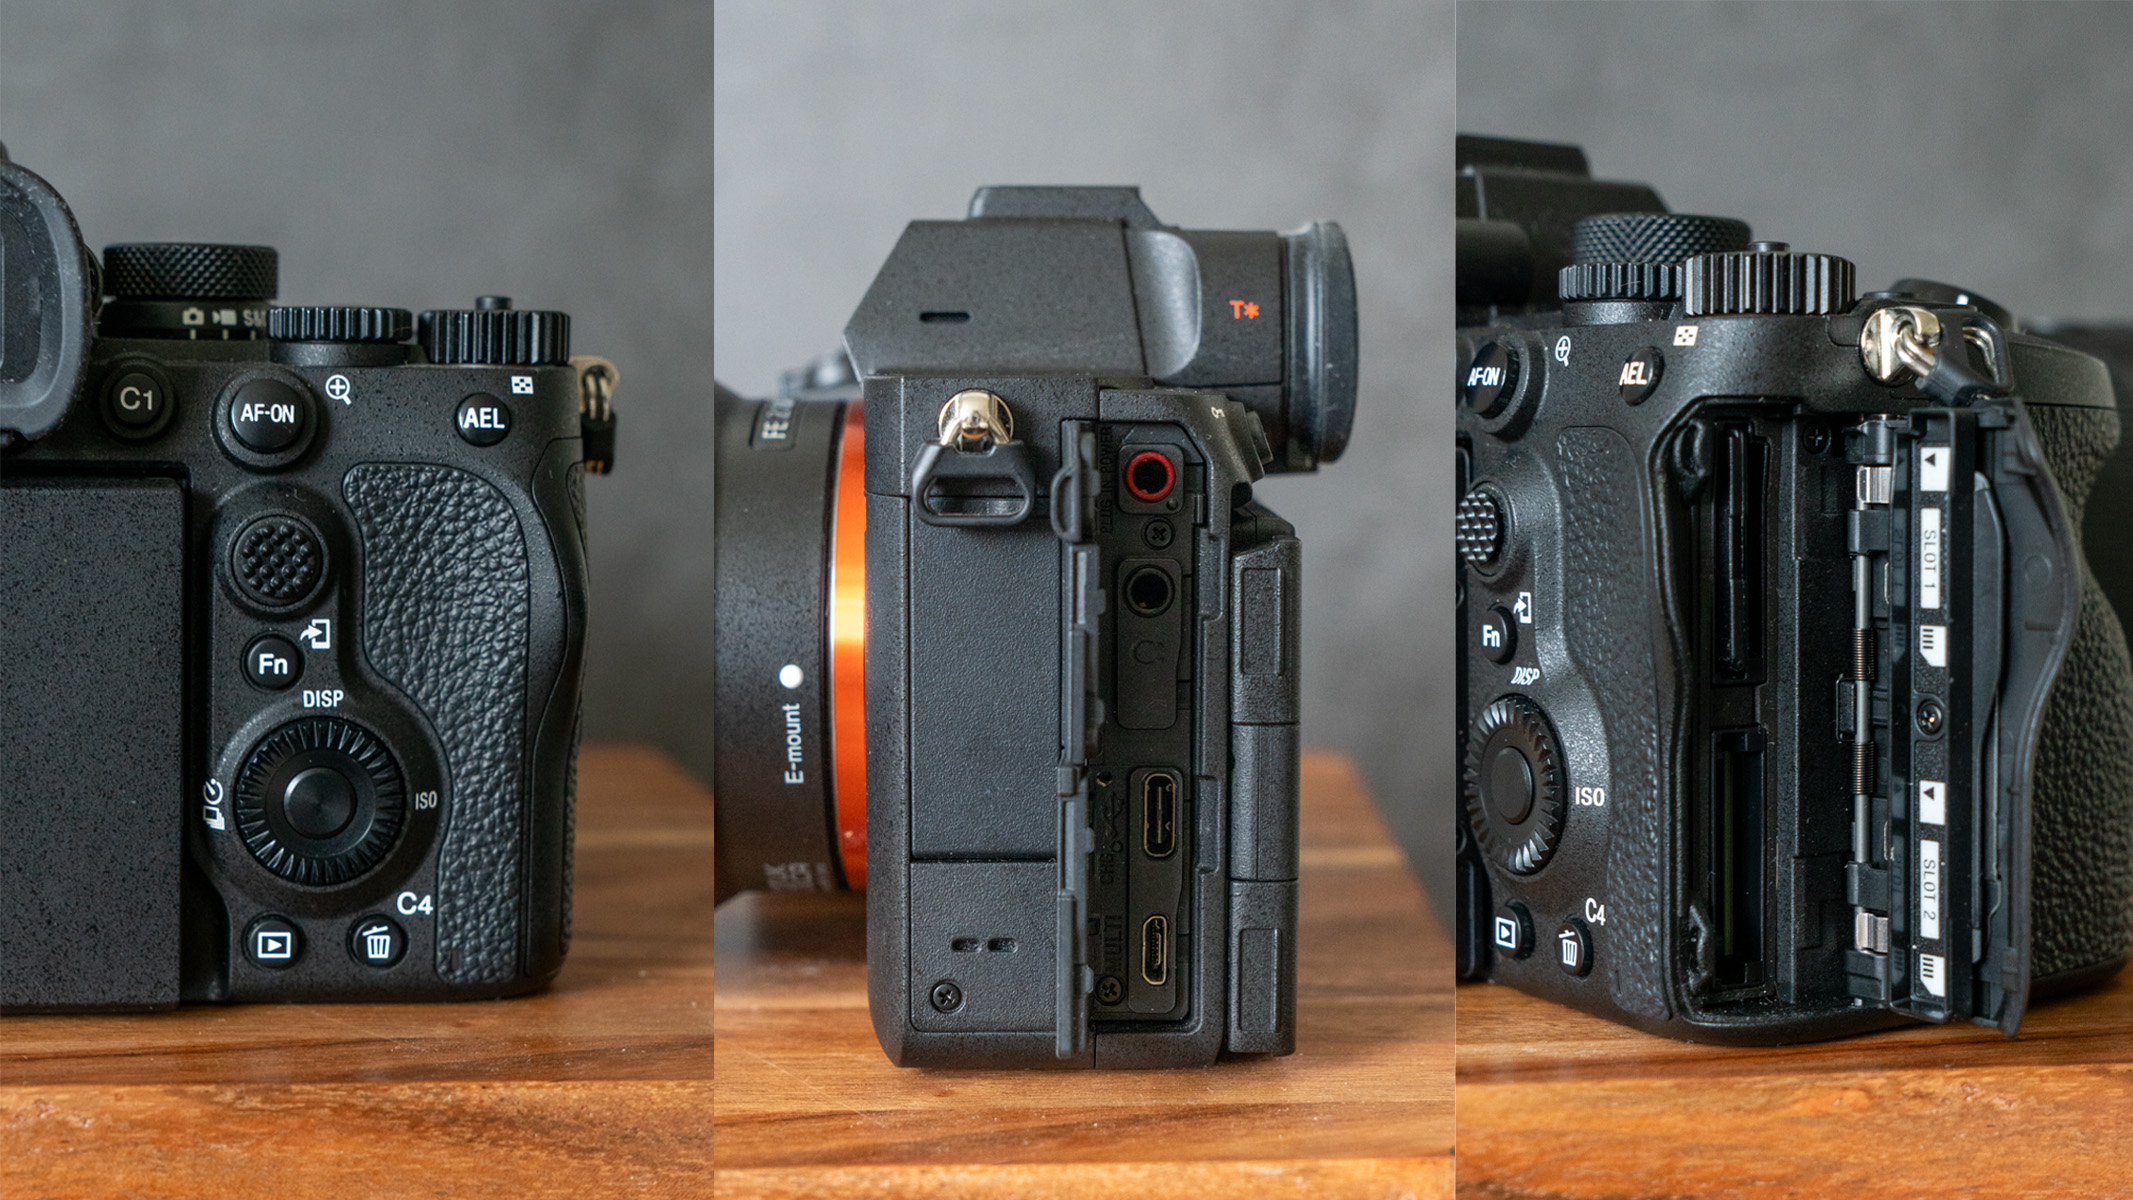 Three images showing details on the Sony A7R V camera body